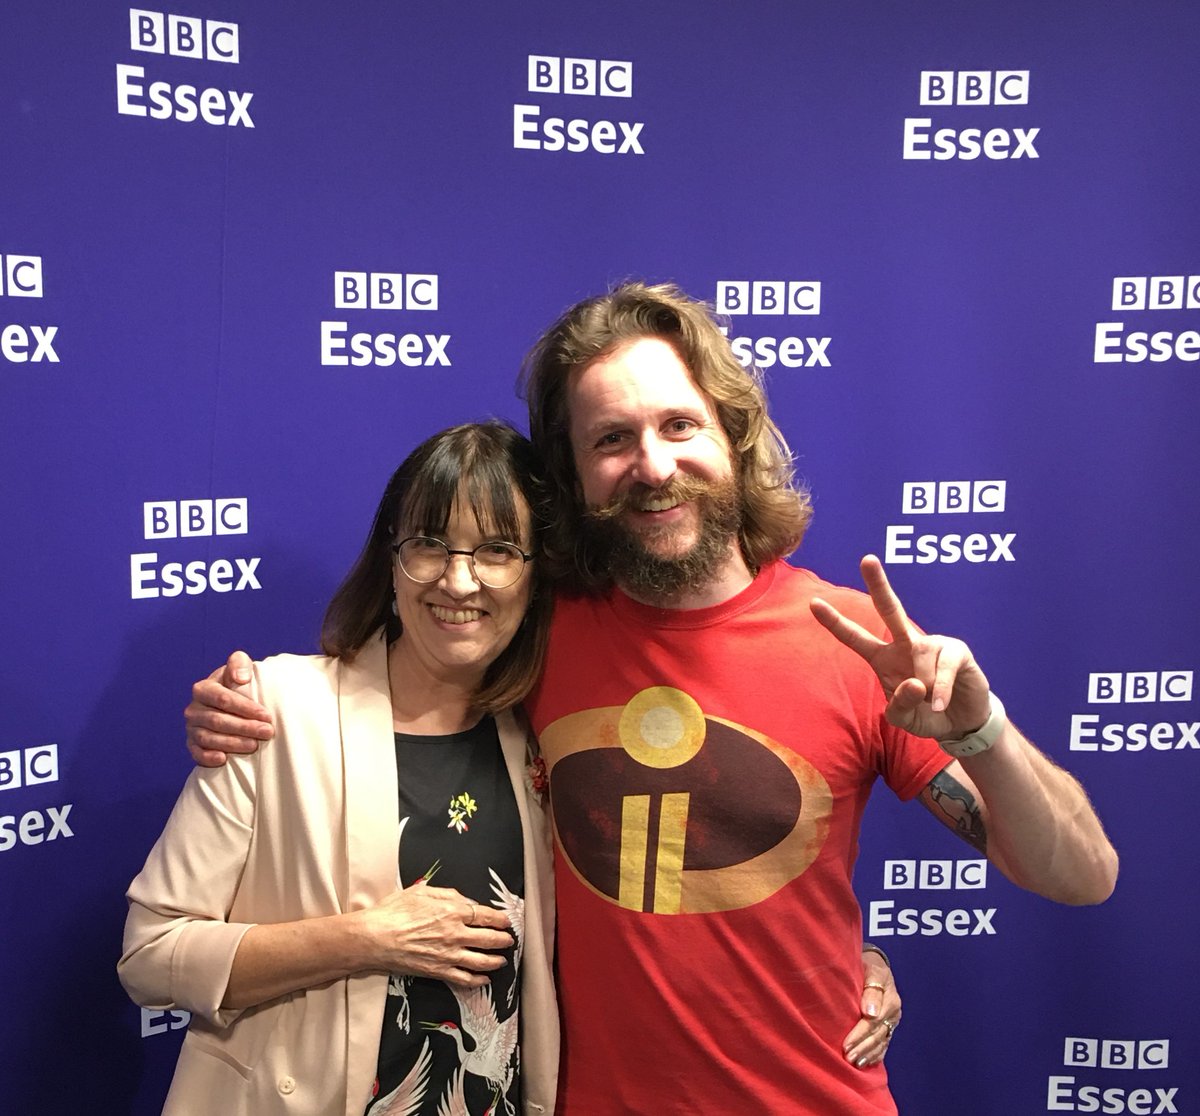 Took part in my 1st ever radio interview with Rob Jelly of BBC Essex along with David Evans, talking about our writing panel with @RosieSandler & Michael Heath. We're 1/2 way through our tour of 'Behind the Covers of Crime'. See @EssexLibraries #PickUpAPageTurner @The_CWA